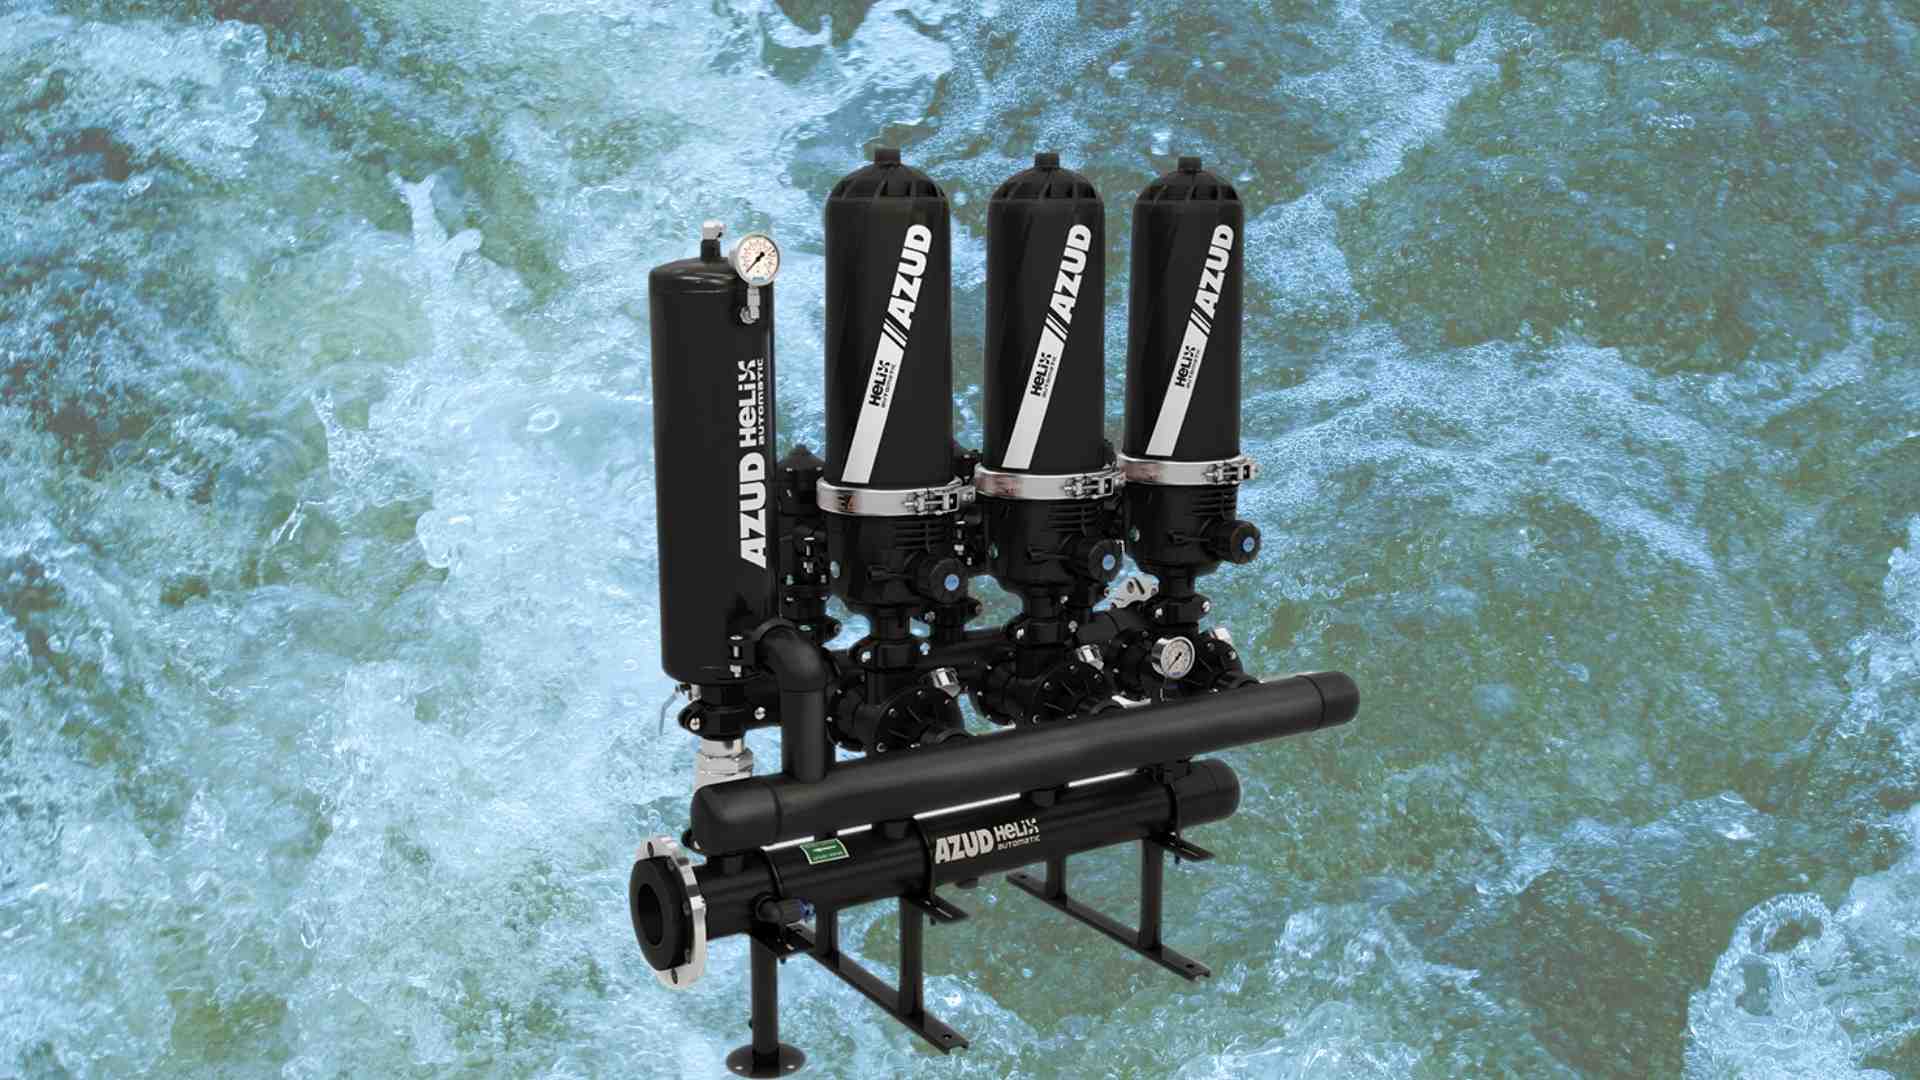 Automatic filters for large flow rates or high-water flow rates